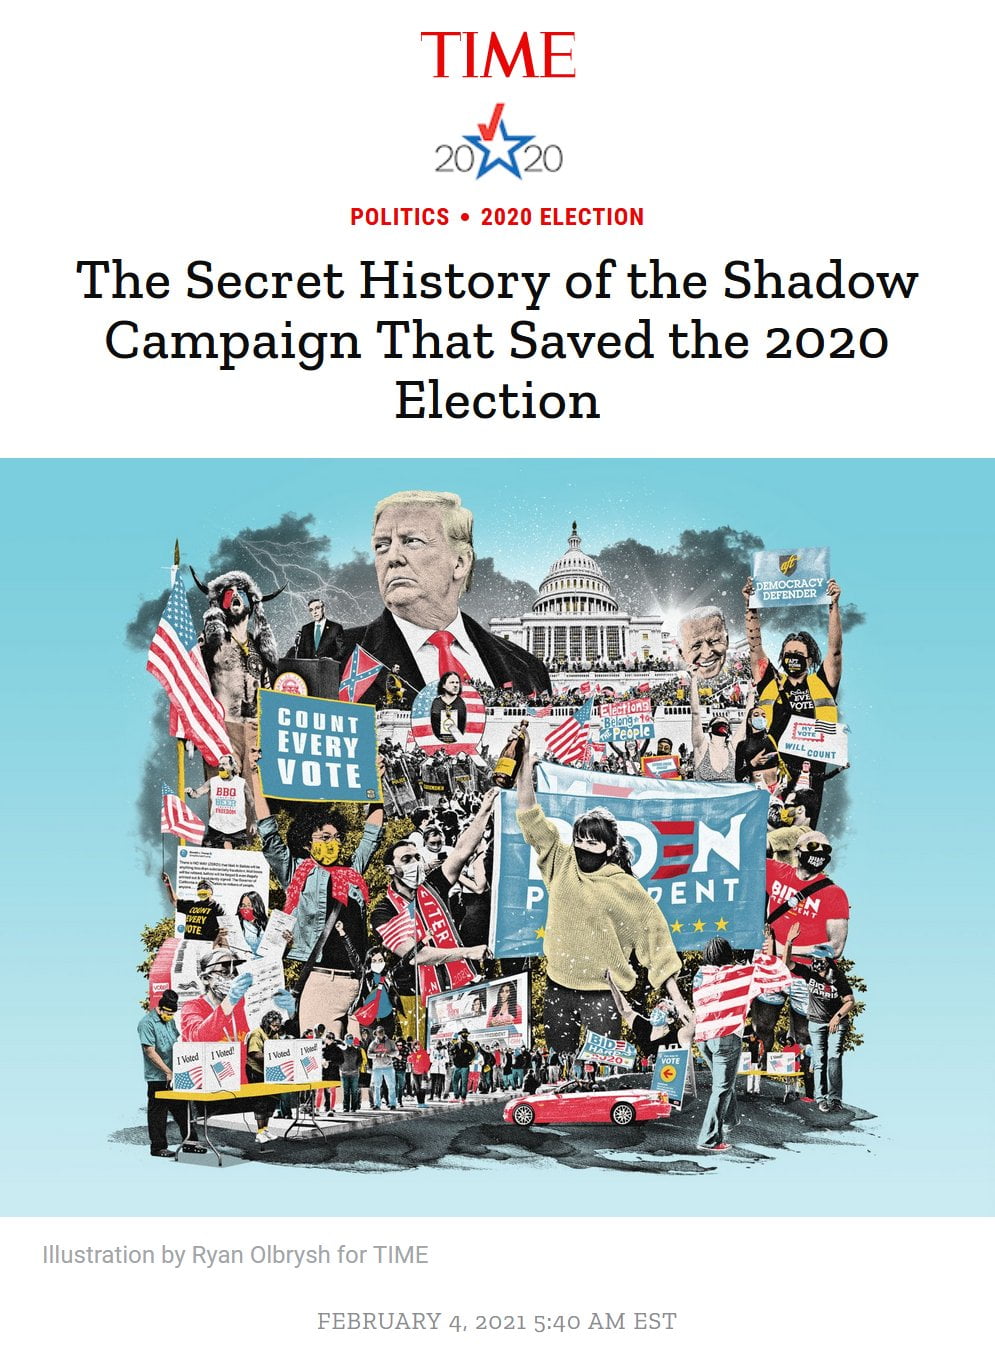 The secret history of the shadow campaign to stop...